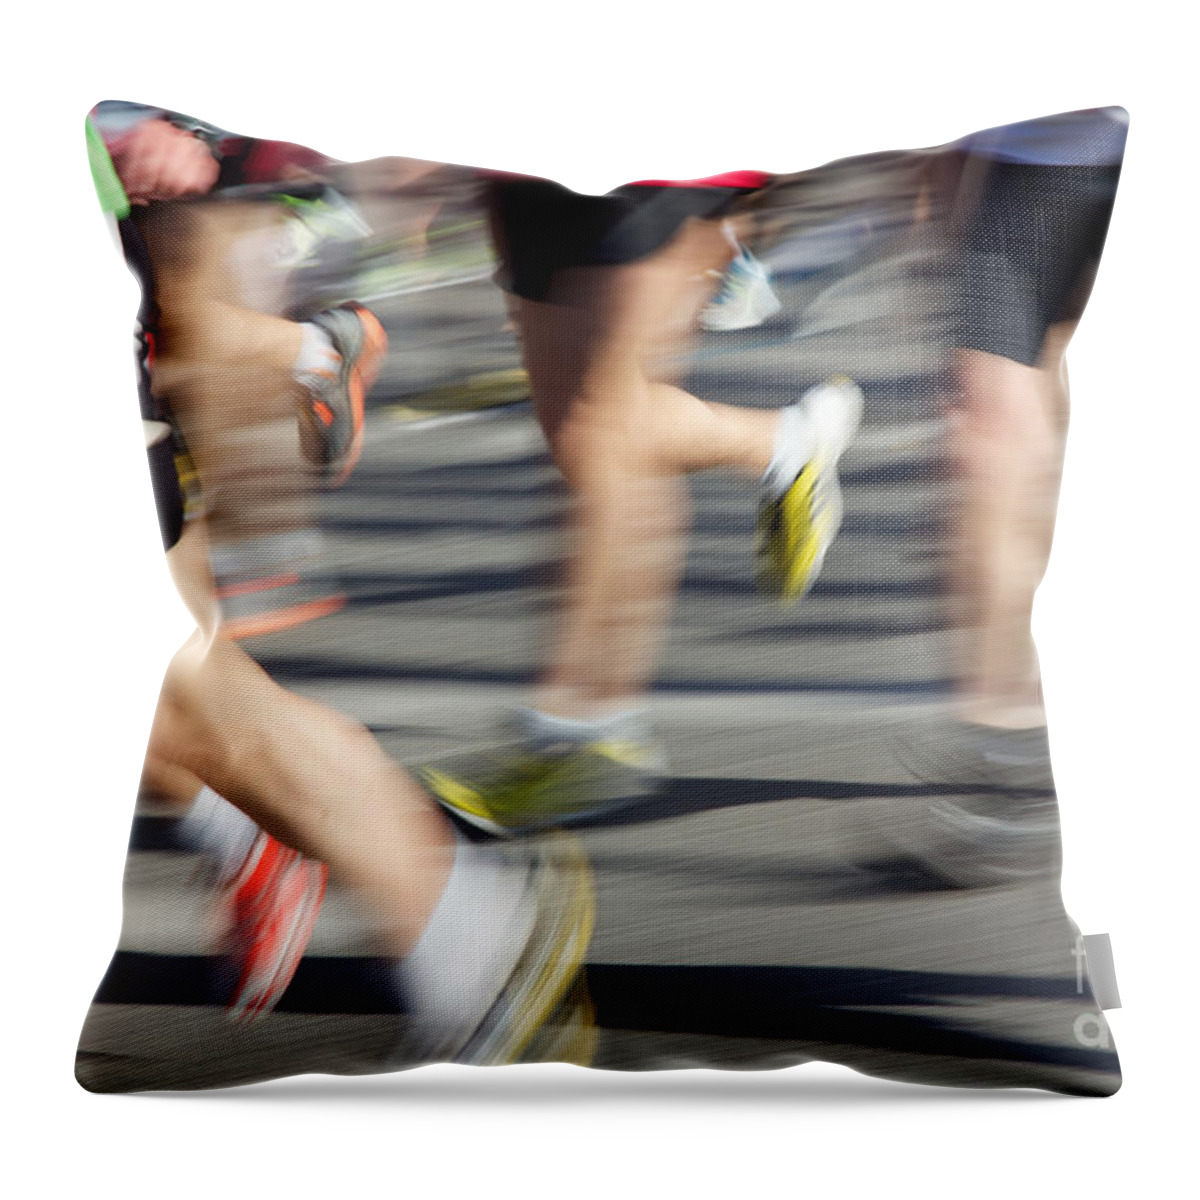 28th Throw Pillow featuring the photograph Blurred Marathon Runners by Jannis Werner